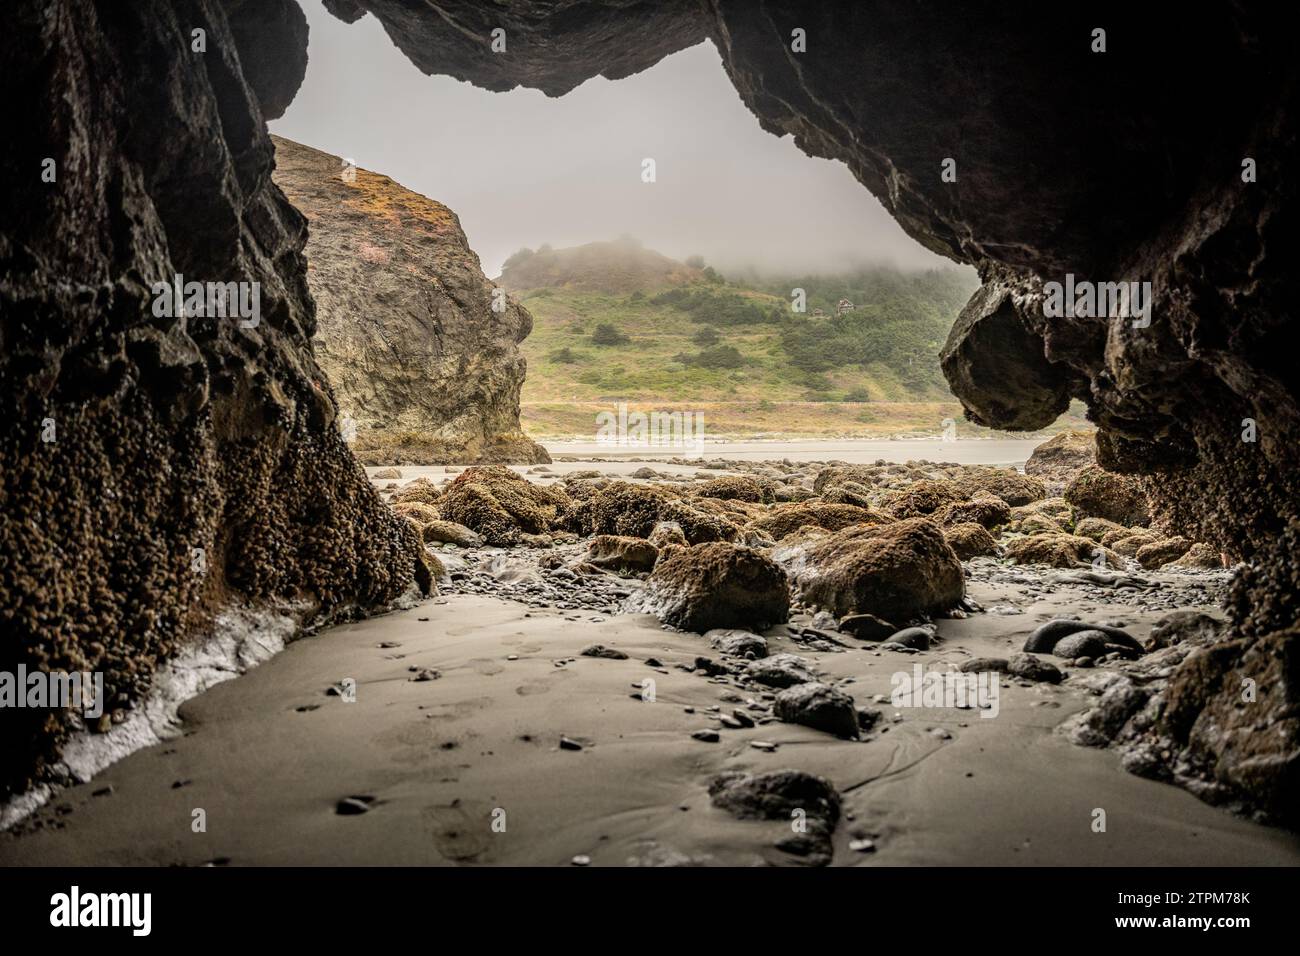 Low Tide Reveals Anemone Covered Sea Cave along the Oregon Coast Stock Photo